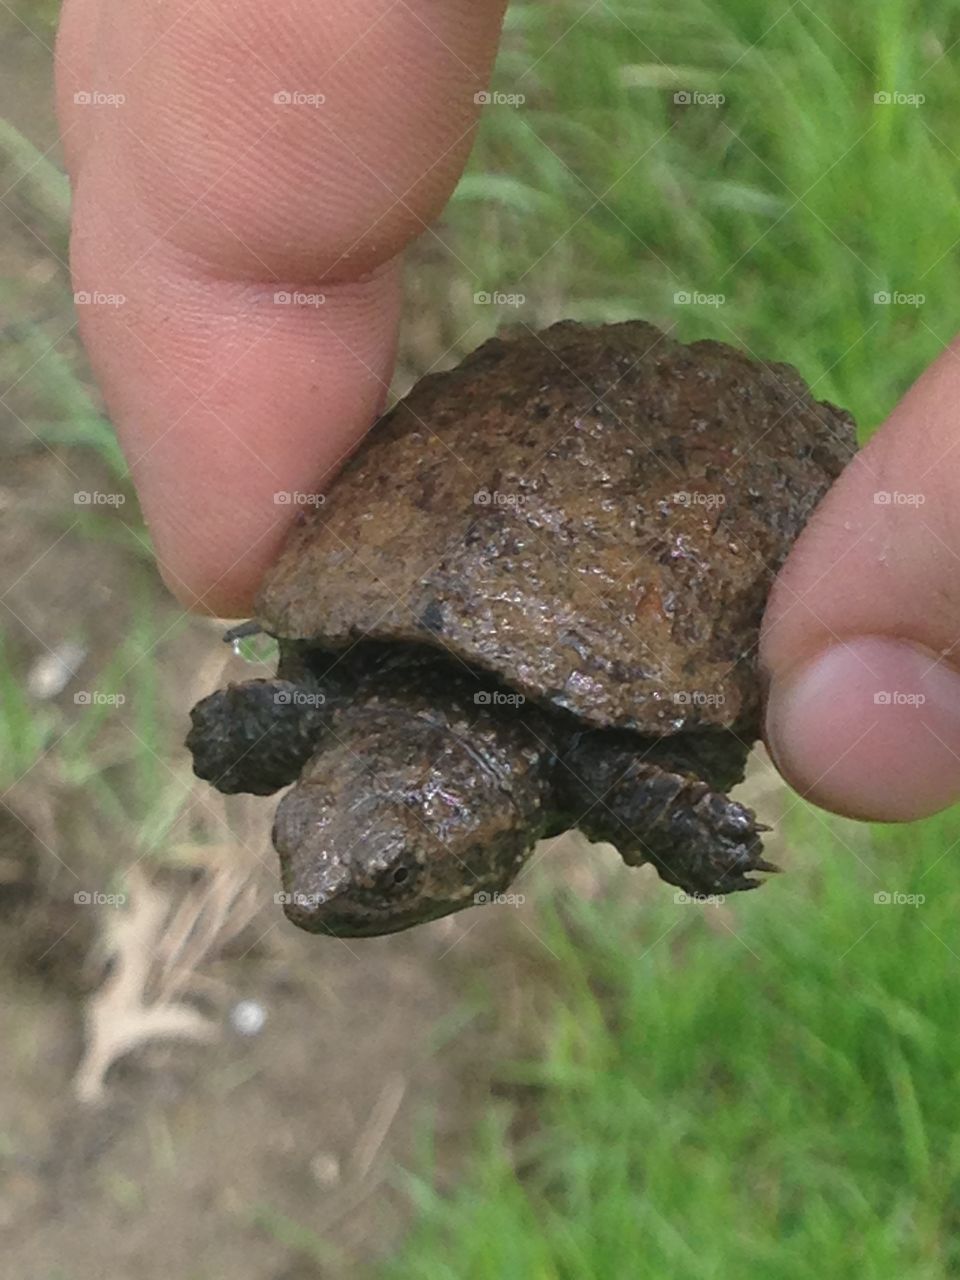 Tiny Turtle. A baby Alligator Snapping Turtle found its way into my yard.